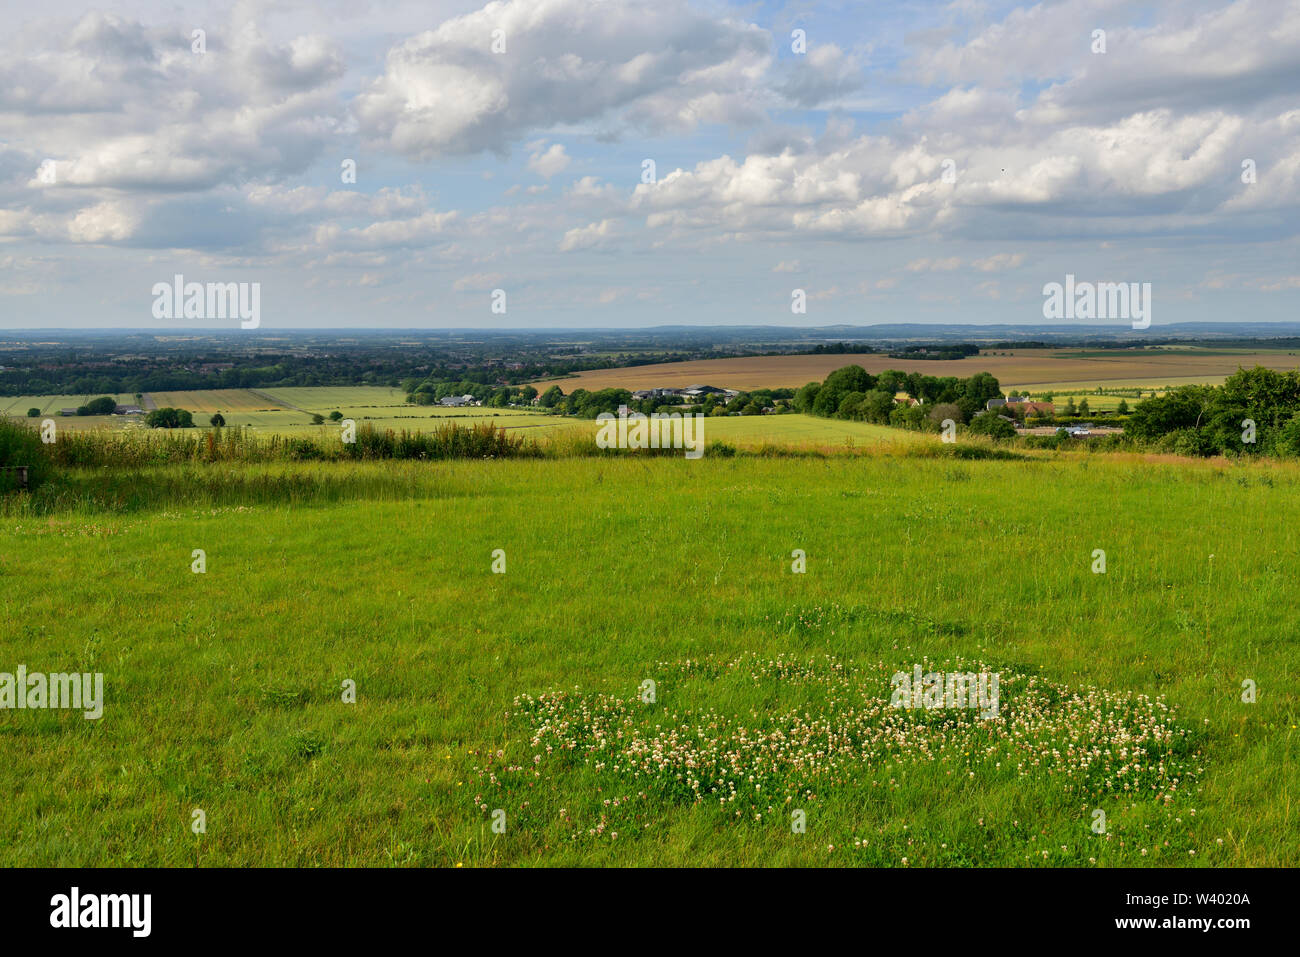 Oxfordshire countryside looking over flat River Thames floodplain valley and agricultural fields Stock Photo